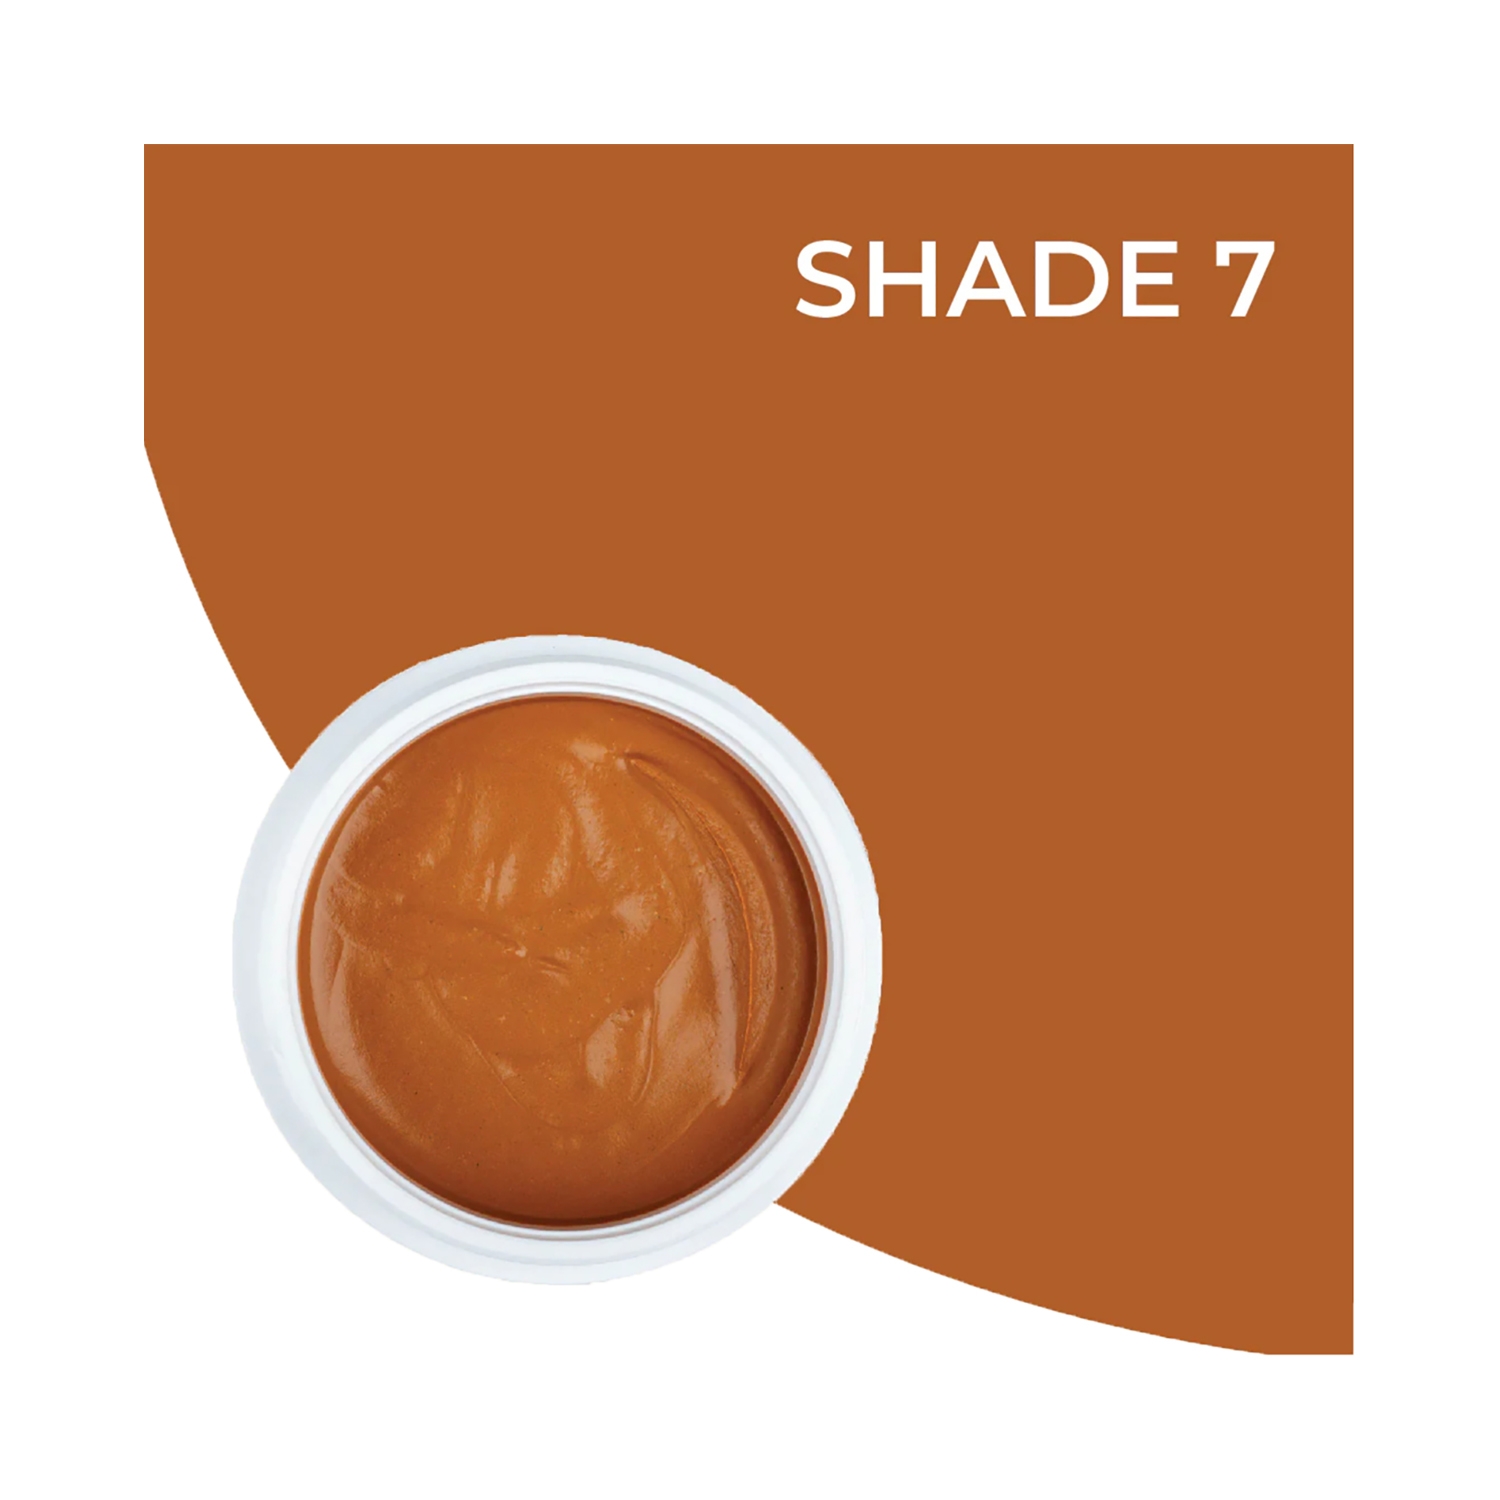 Harkoi | Harkoi Mineral Matte Sunscreen SPF35+ PA++++ for Deep with Yellow and Neutral Undertones - Shade 7 (30g)